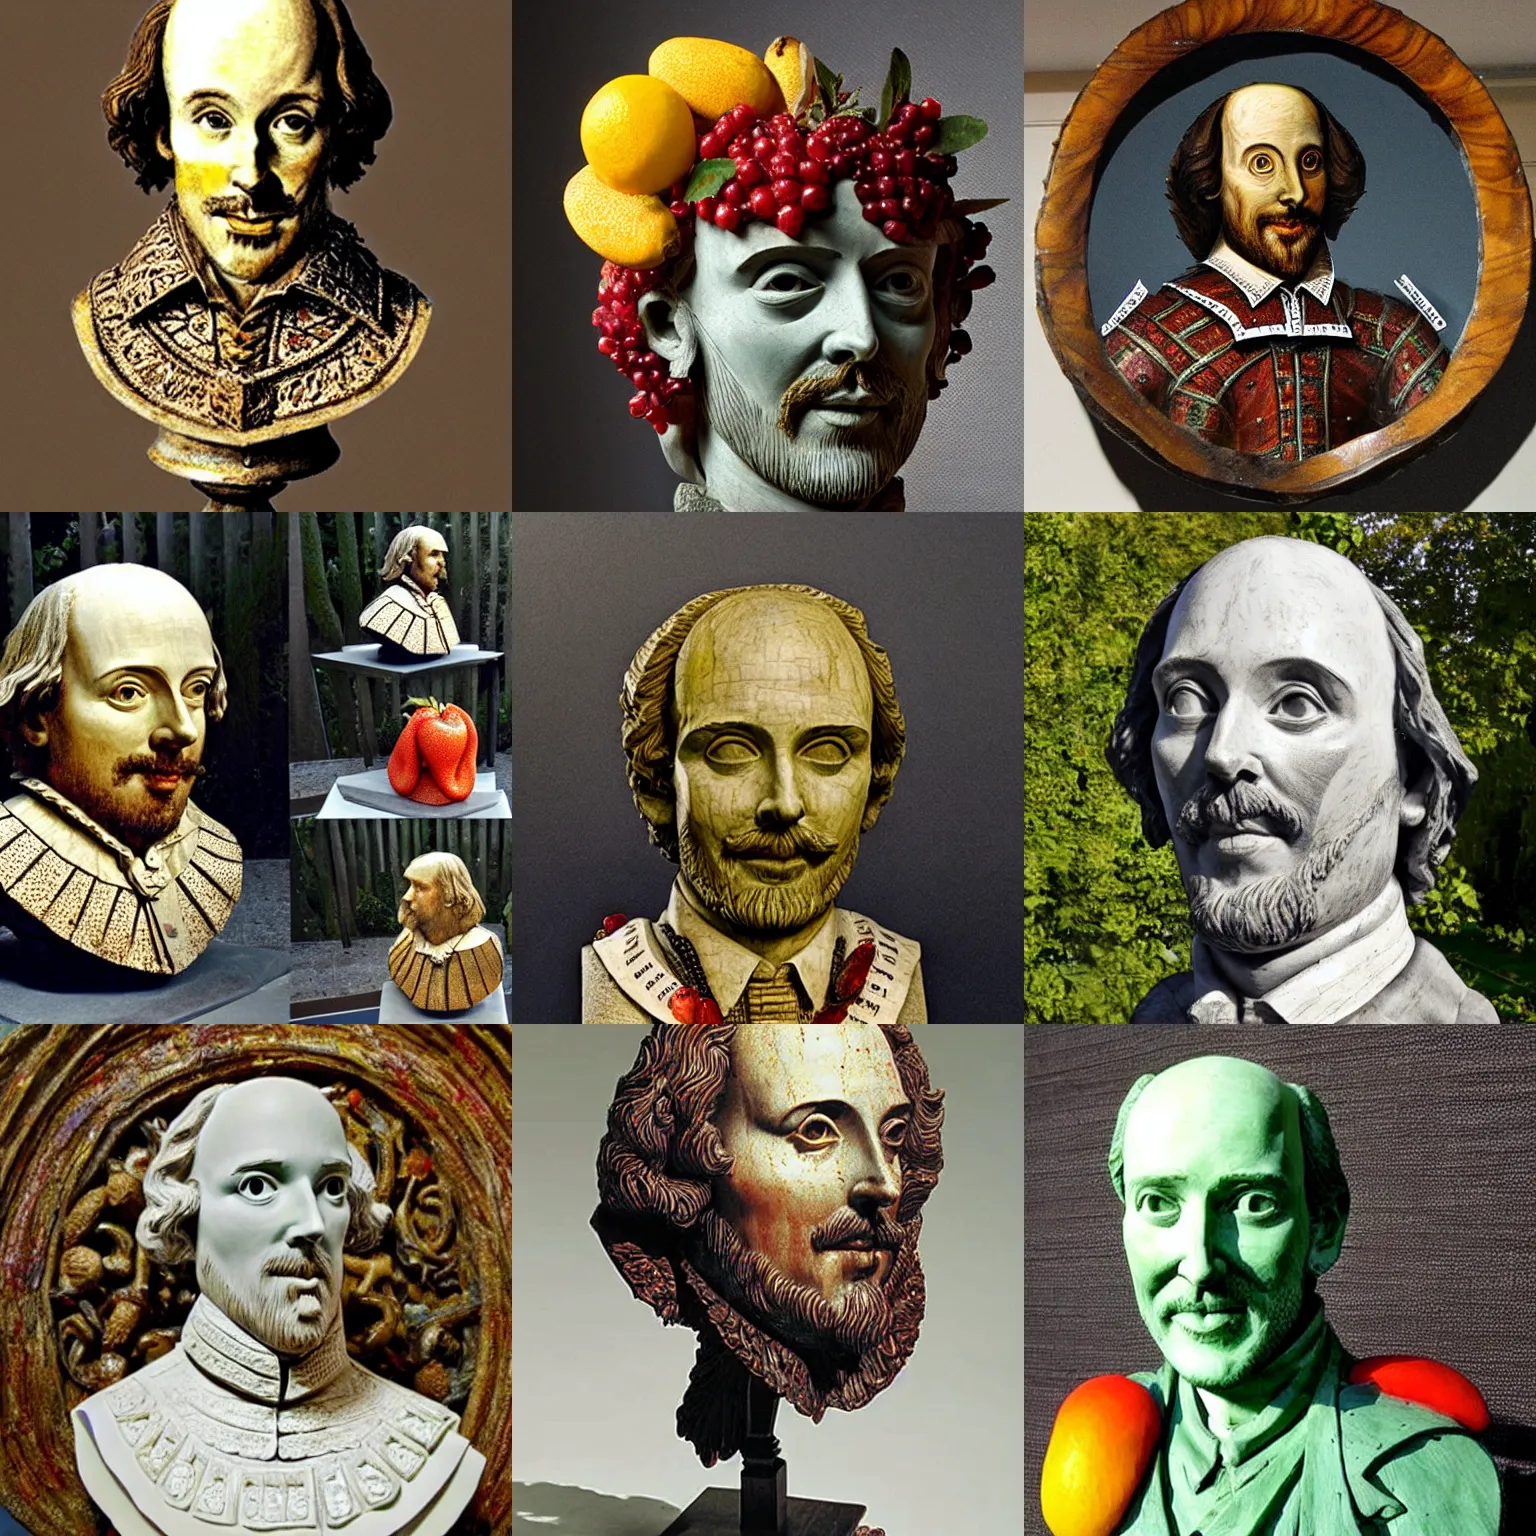 Prompt: sculpture of william shakespear made from fruit pieces